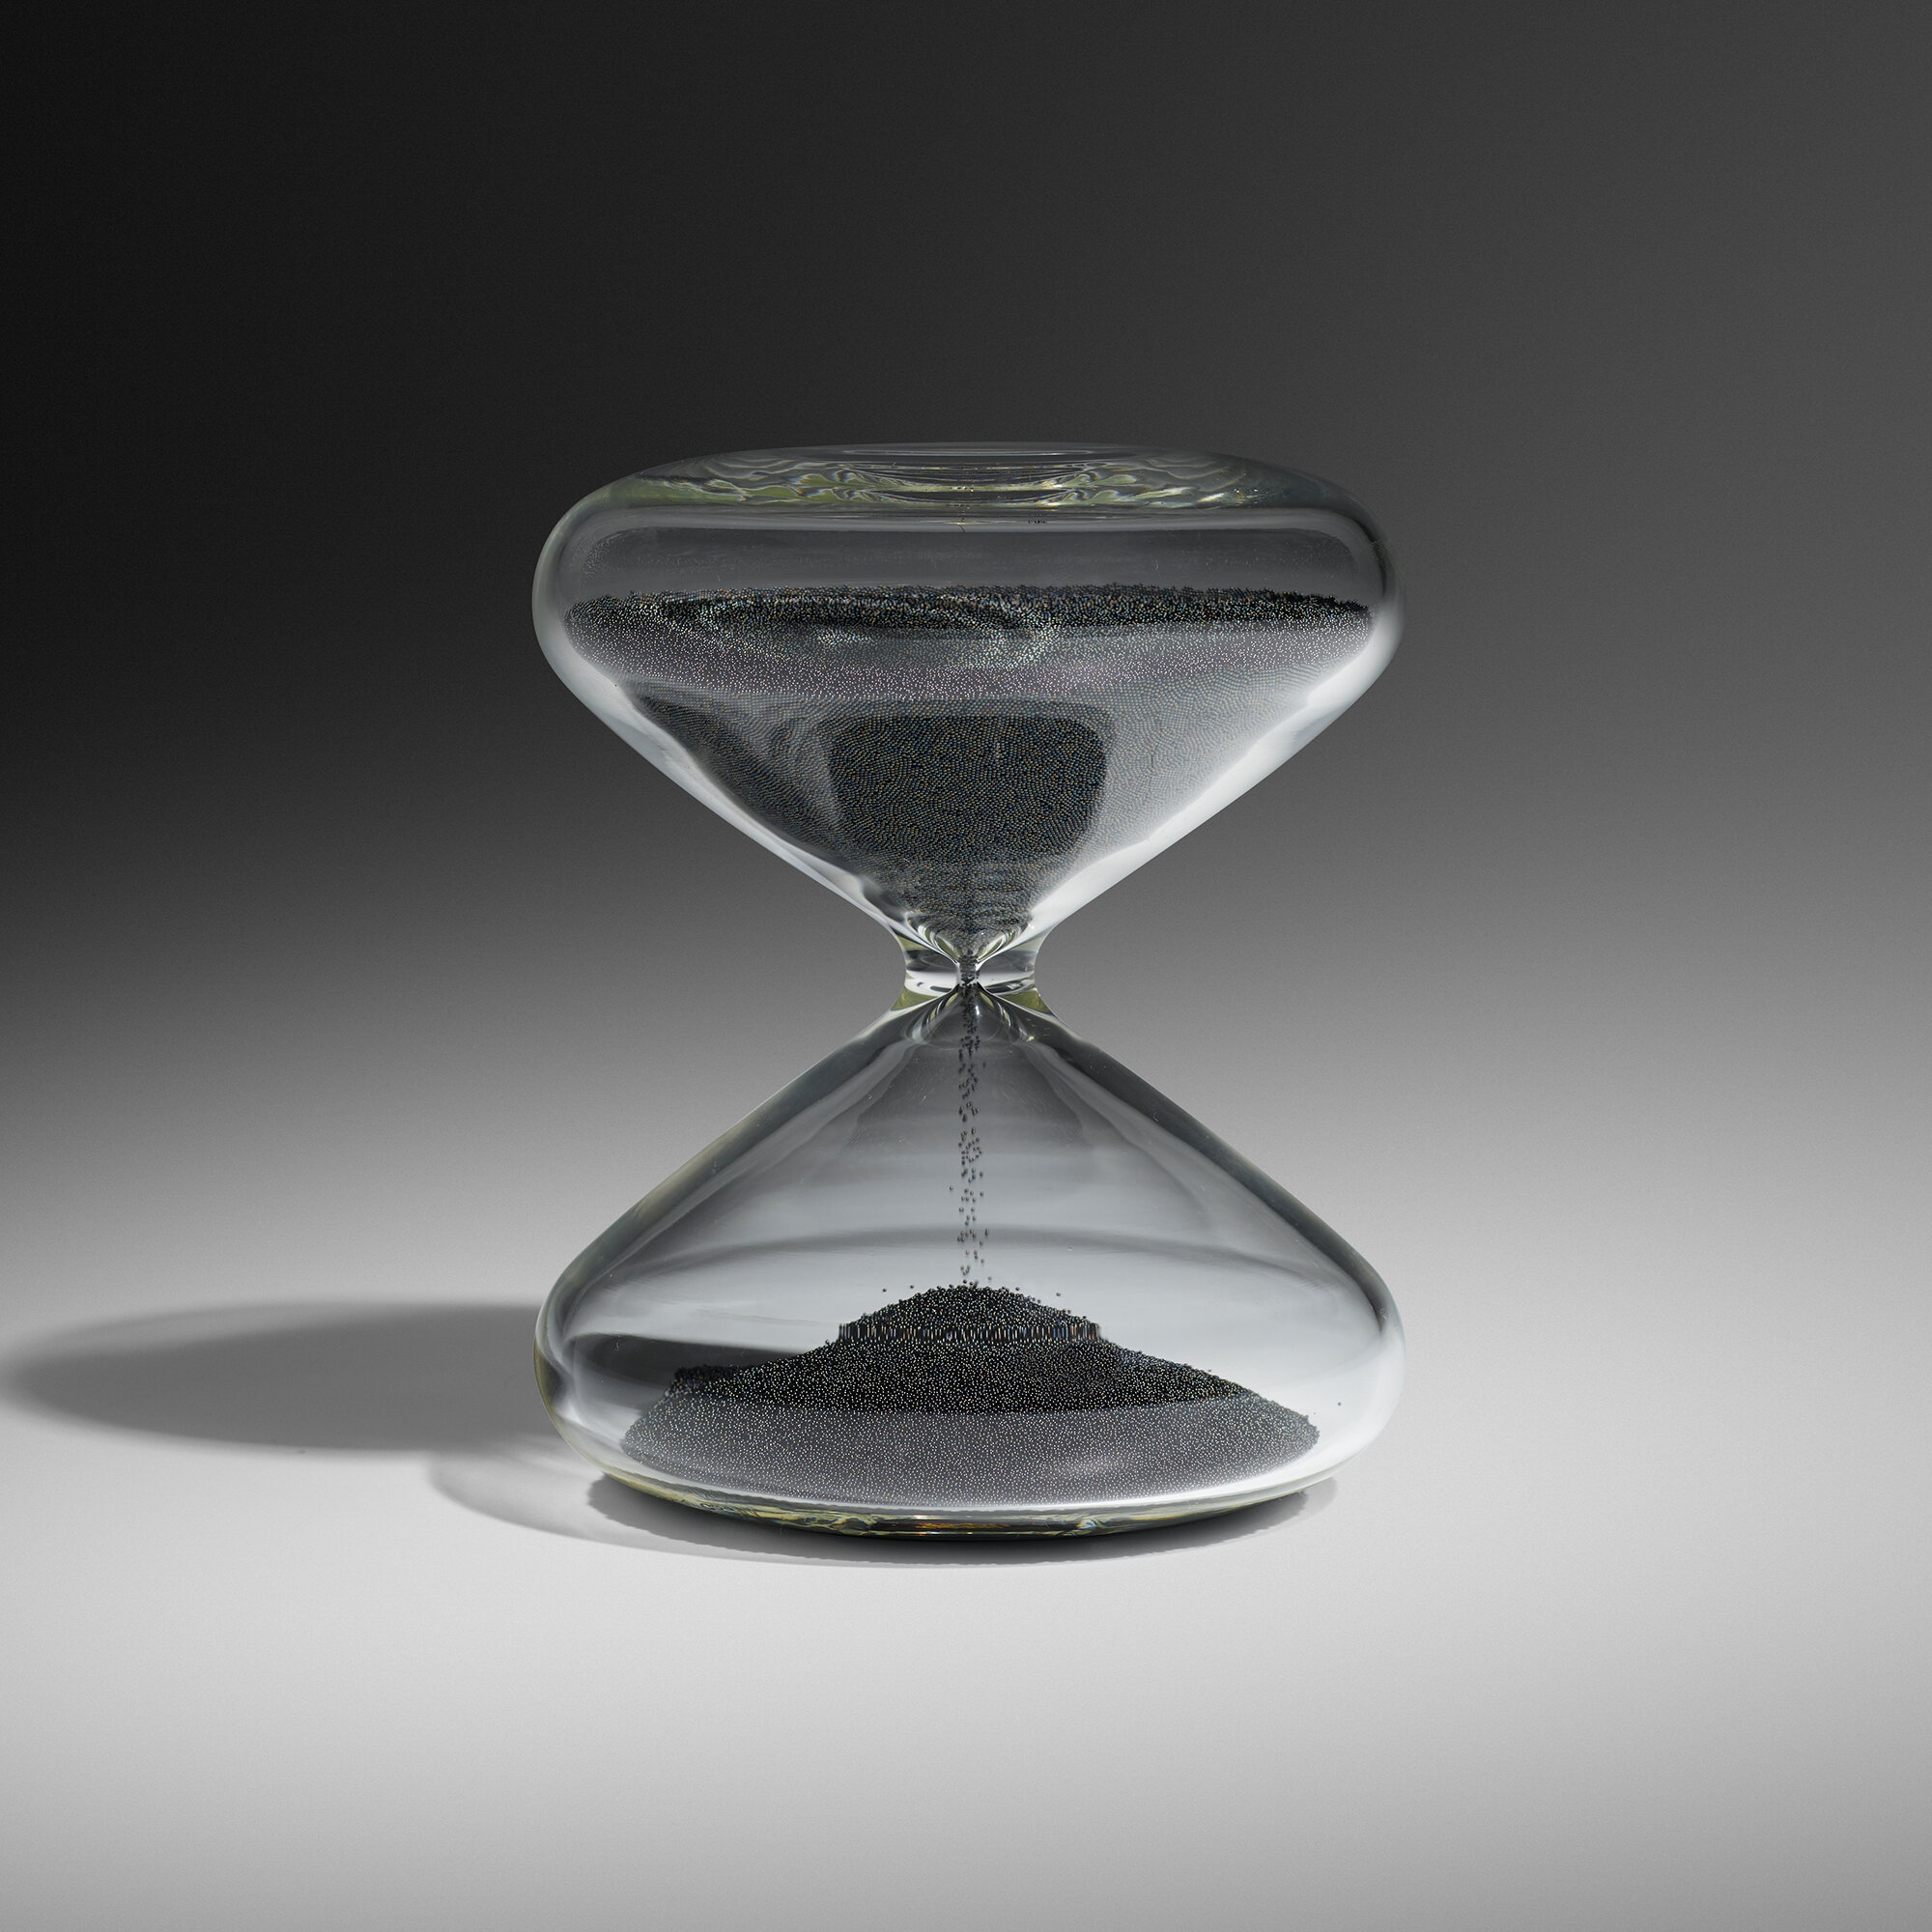 Who is Marc Newson? - The Hour Glass Official